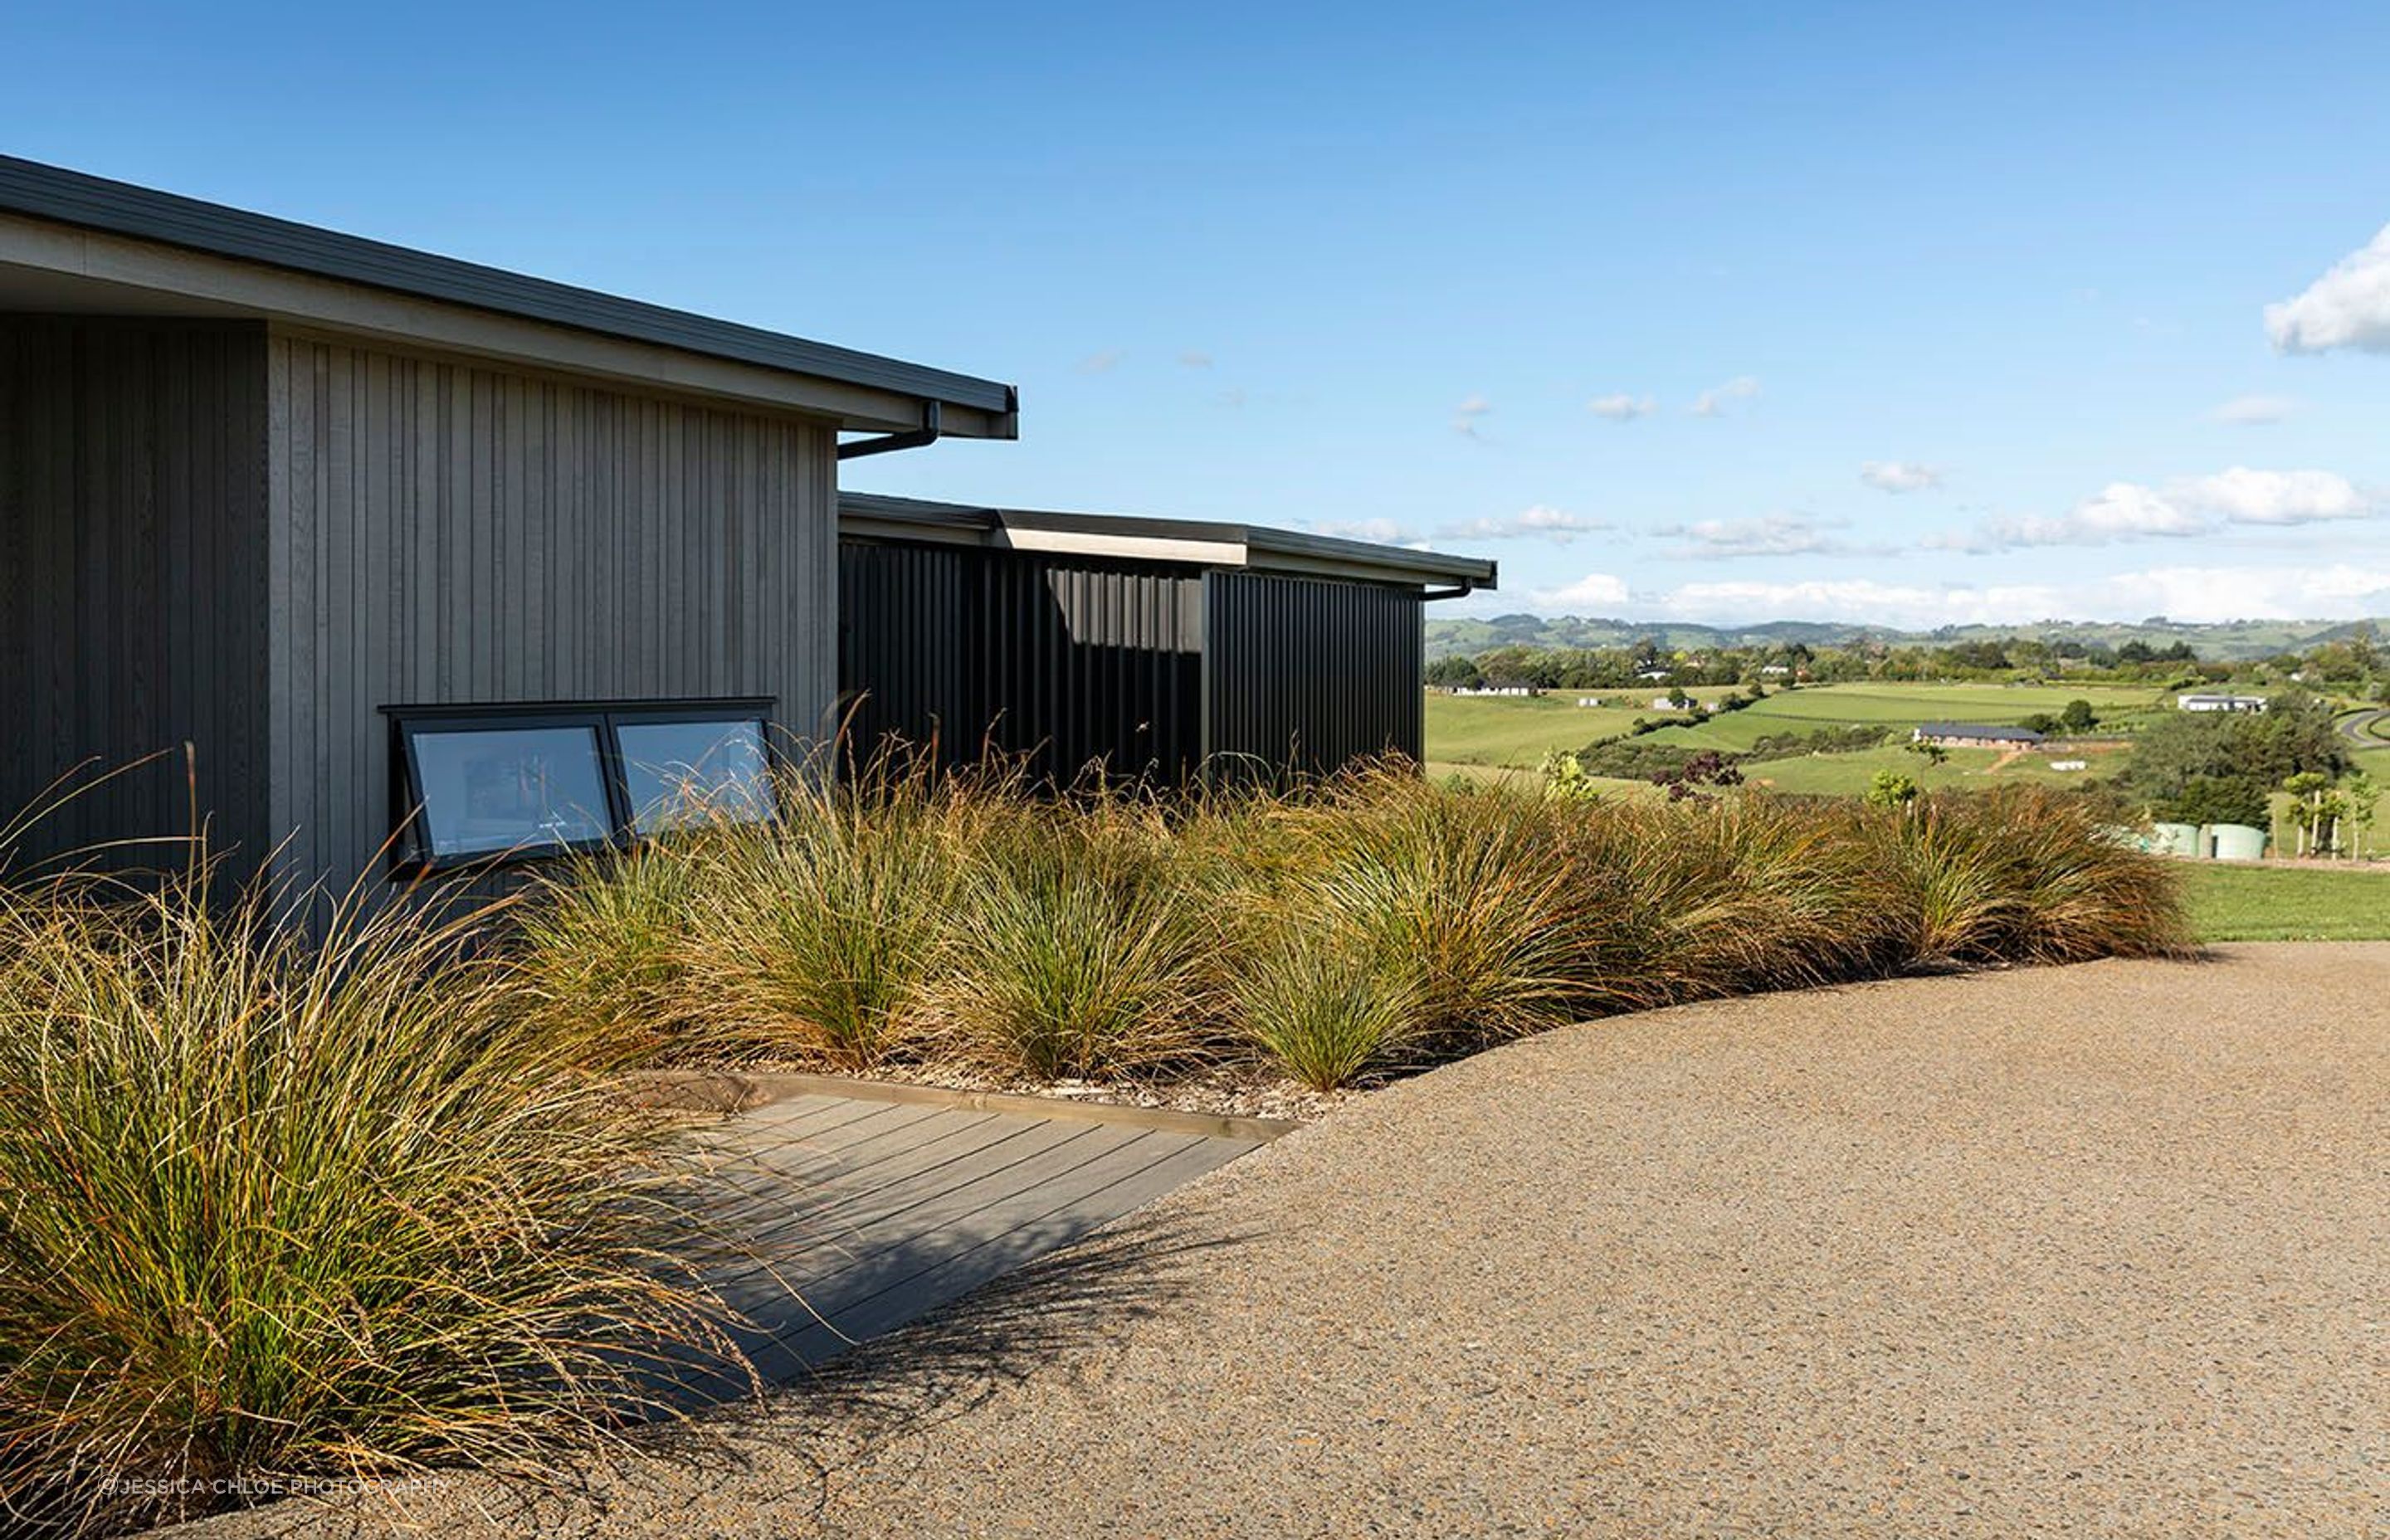 Sitting amongst the tussocks the Cedar and Coloursteel Cladding sit unobtrusively in the landscape.